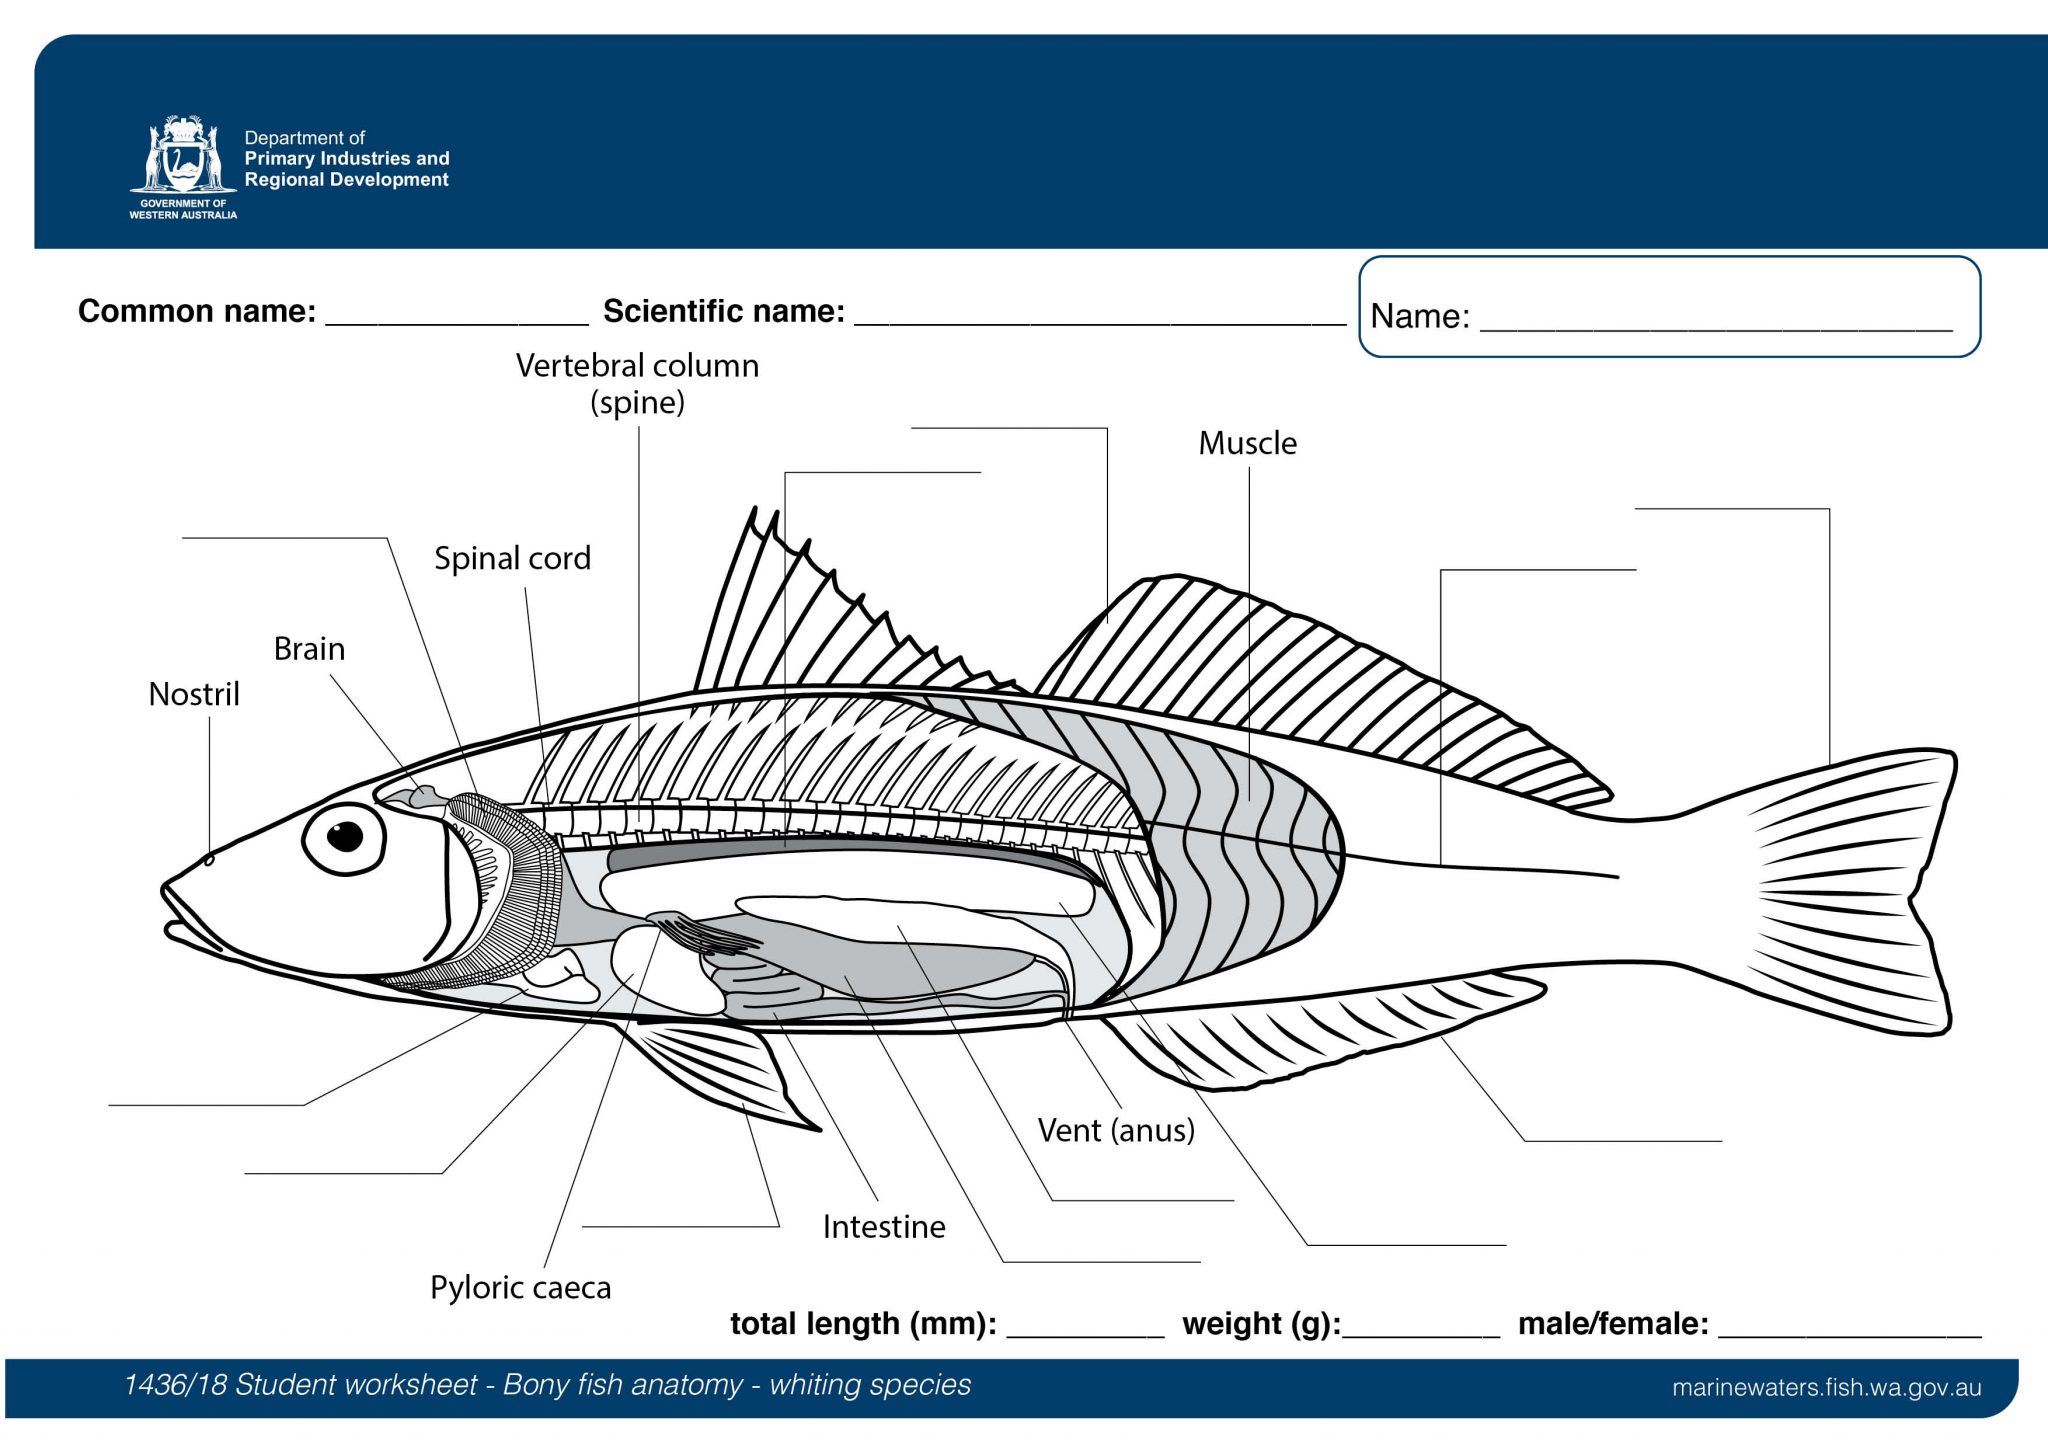 Student worksheet: Bony fish anatomy - Whiting species • Department of  Primary Industries and Regional Development